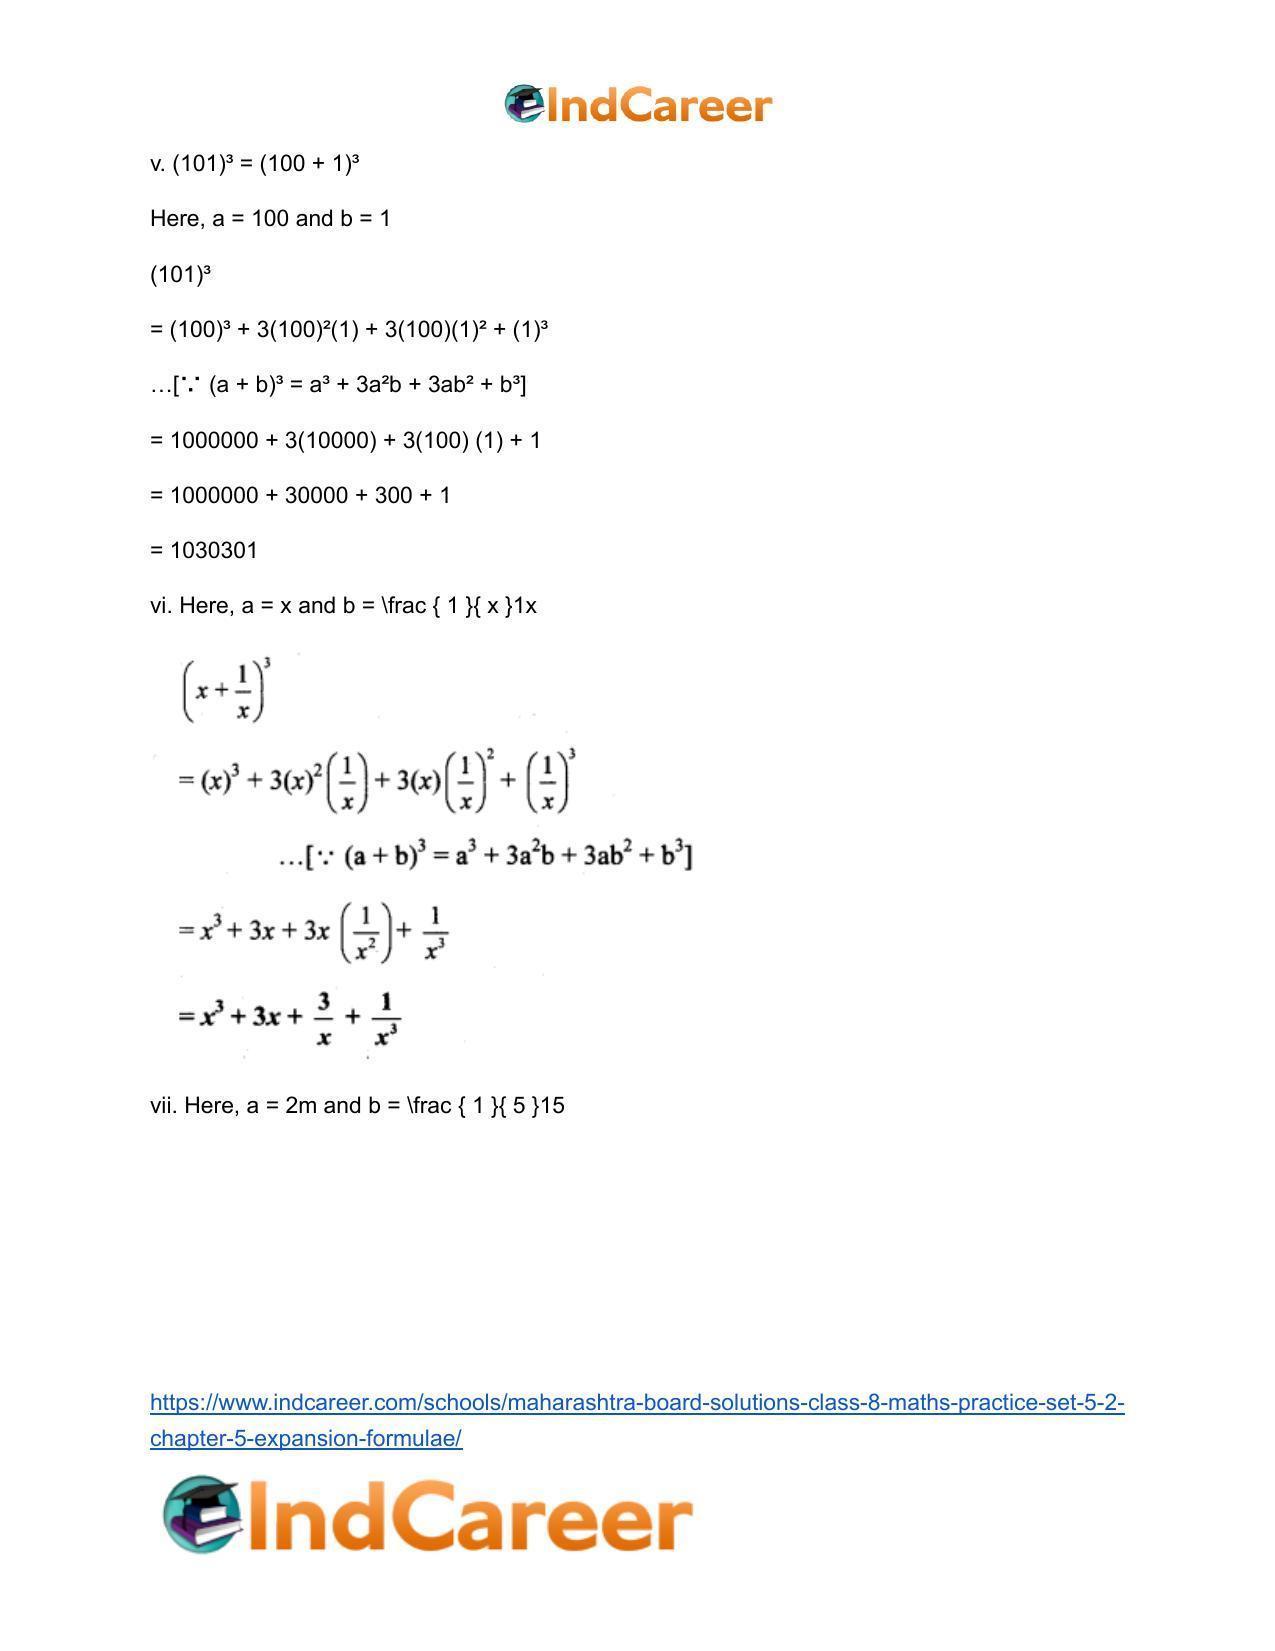 Maharashtra Board Solutions Class 8-Maths (Practice Set 5.2): Chapter 5- Expansion Formulae - Page 4